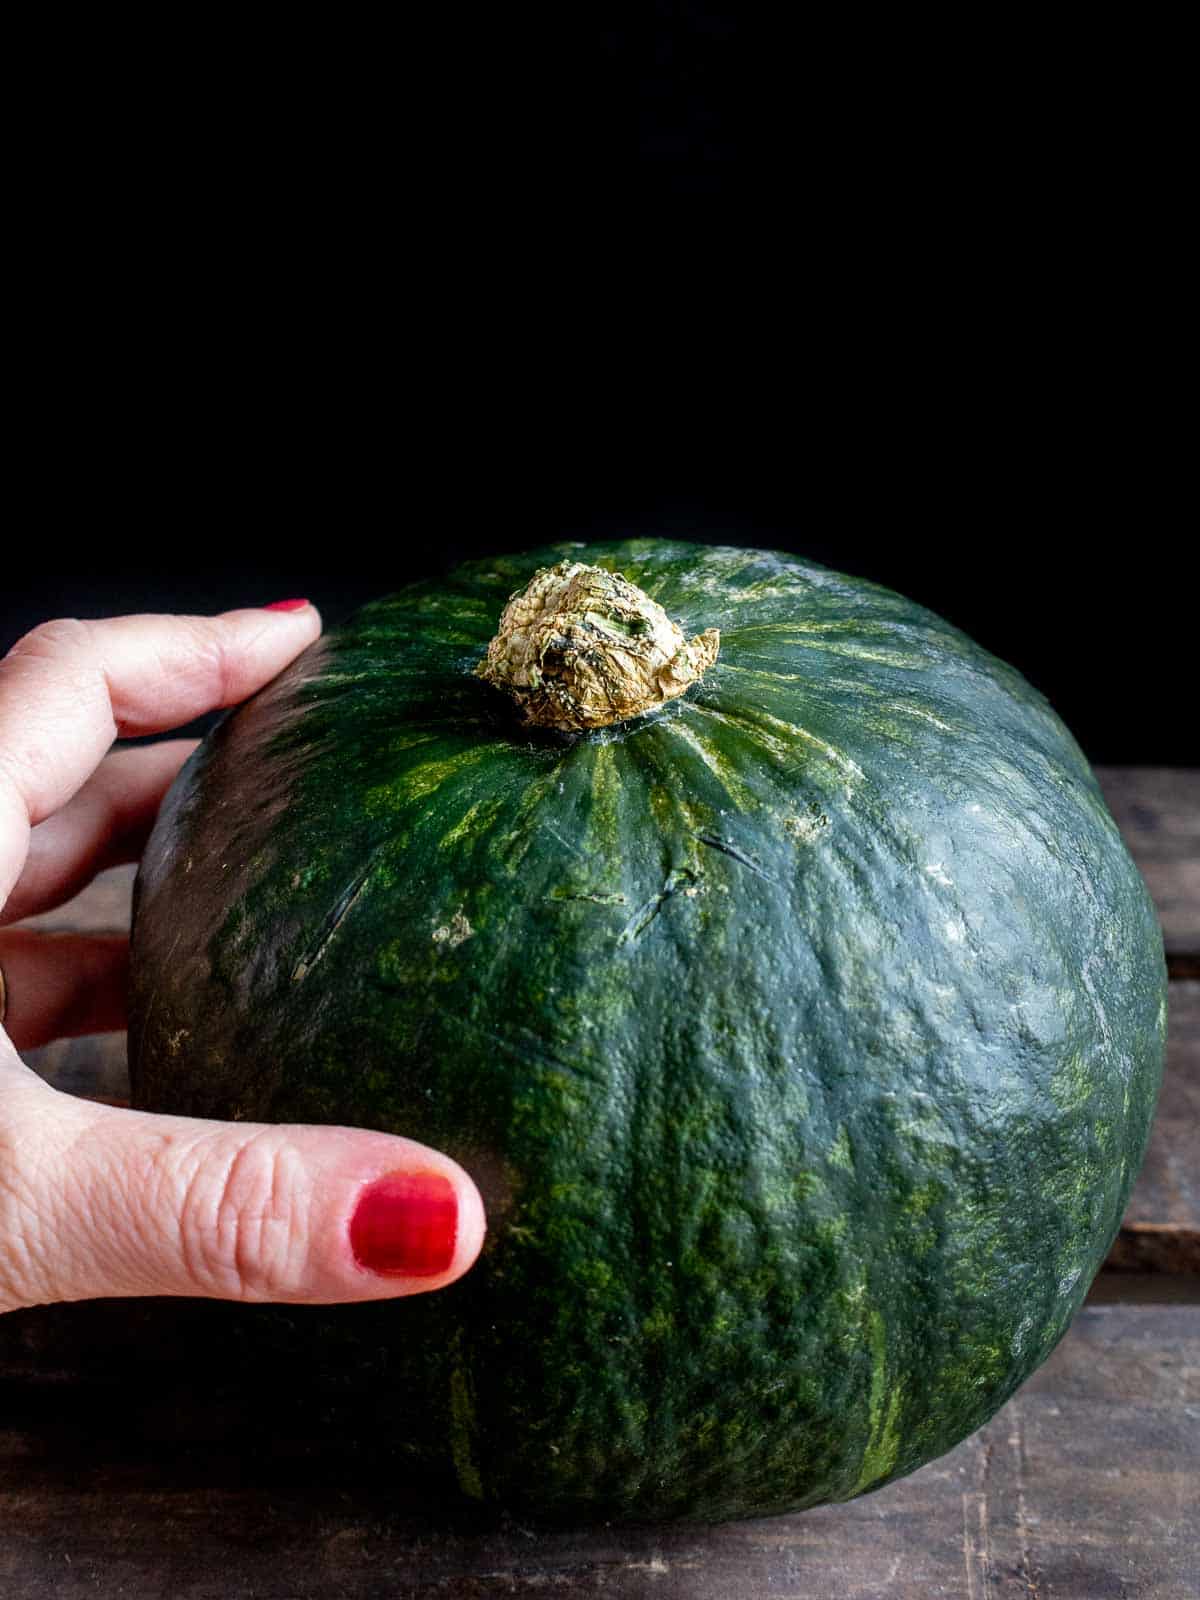 Whole kabocha squash being held by a hand.